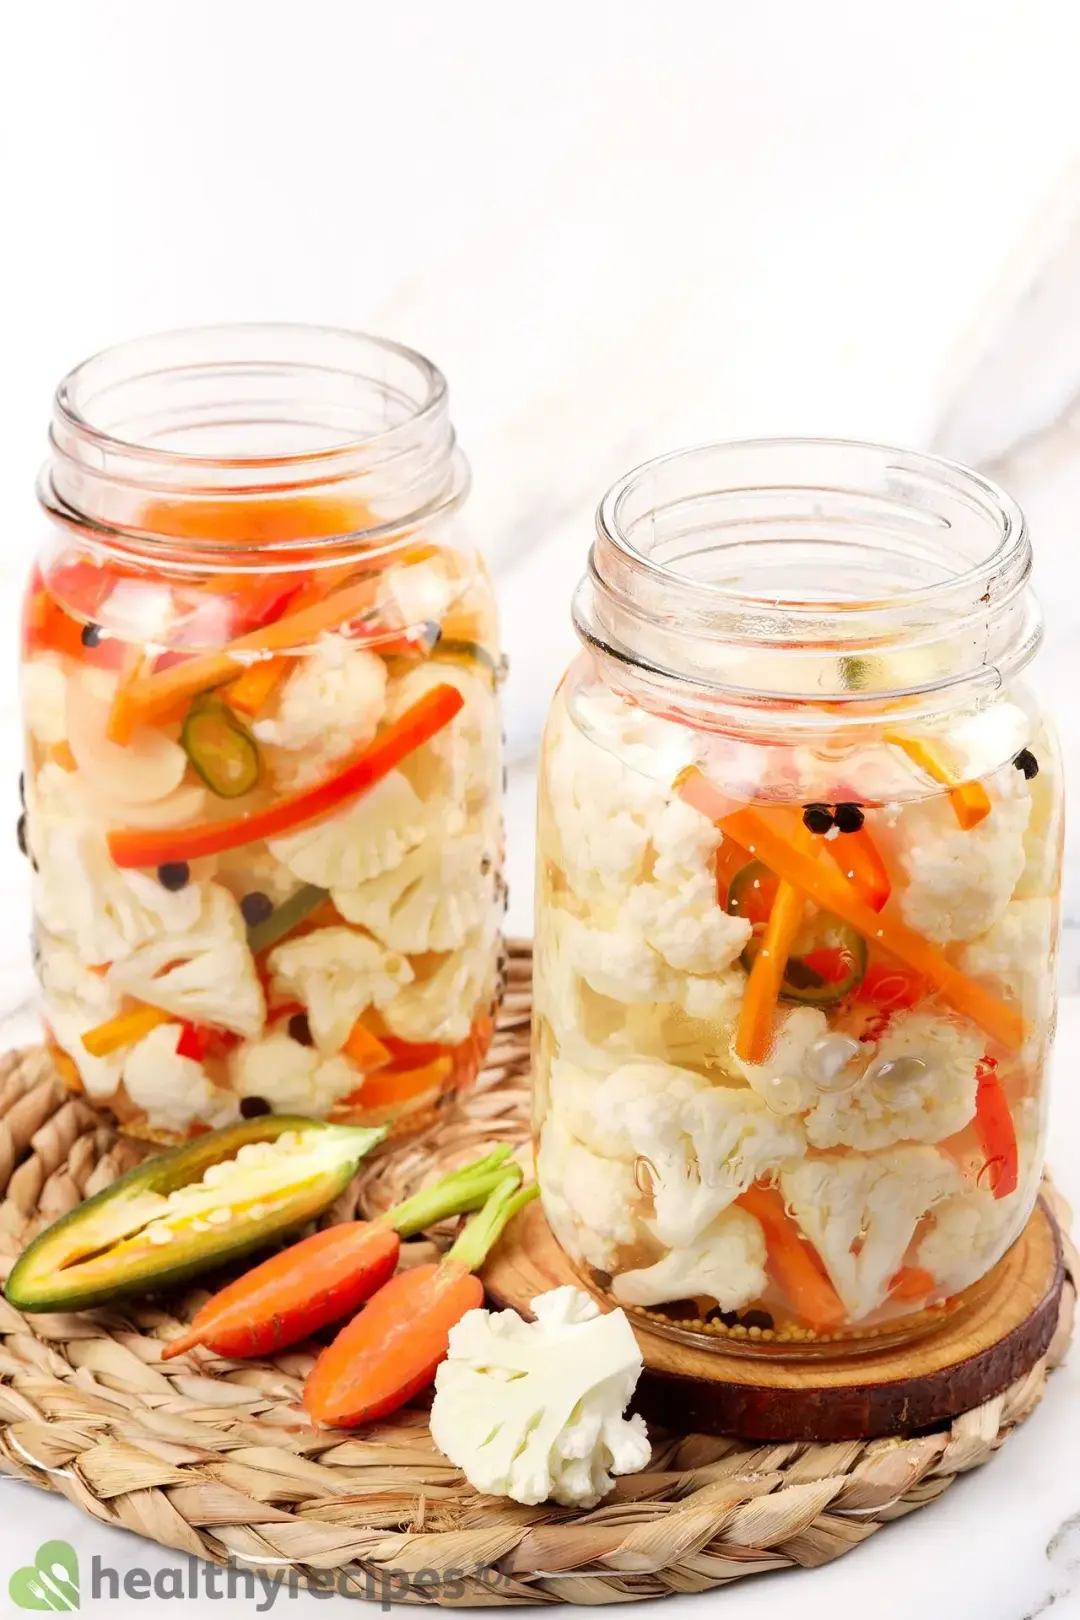 can use reuse pickled cauliflower juice